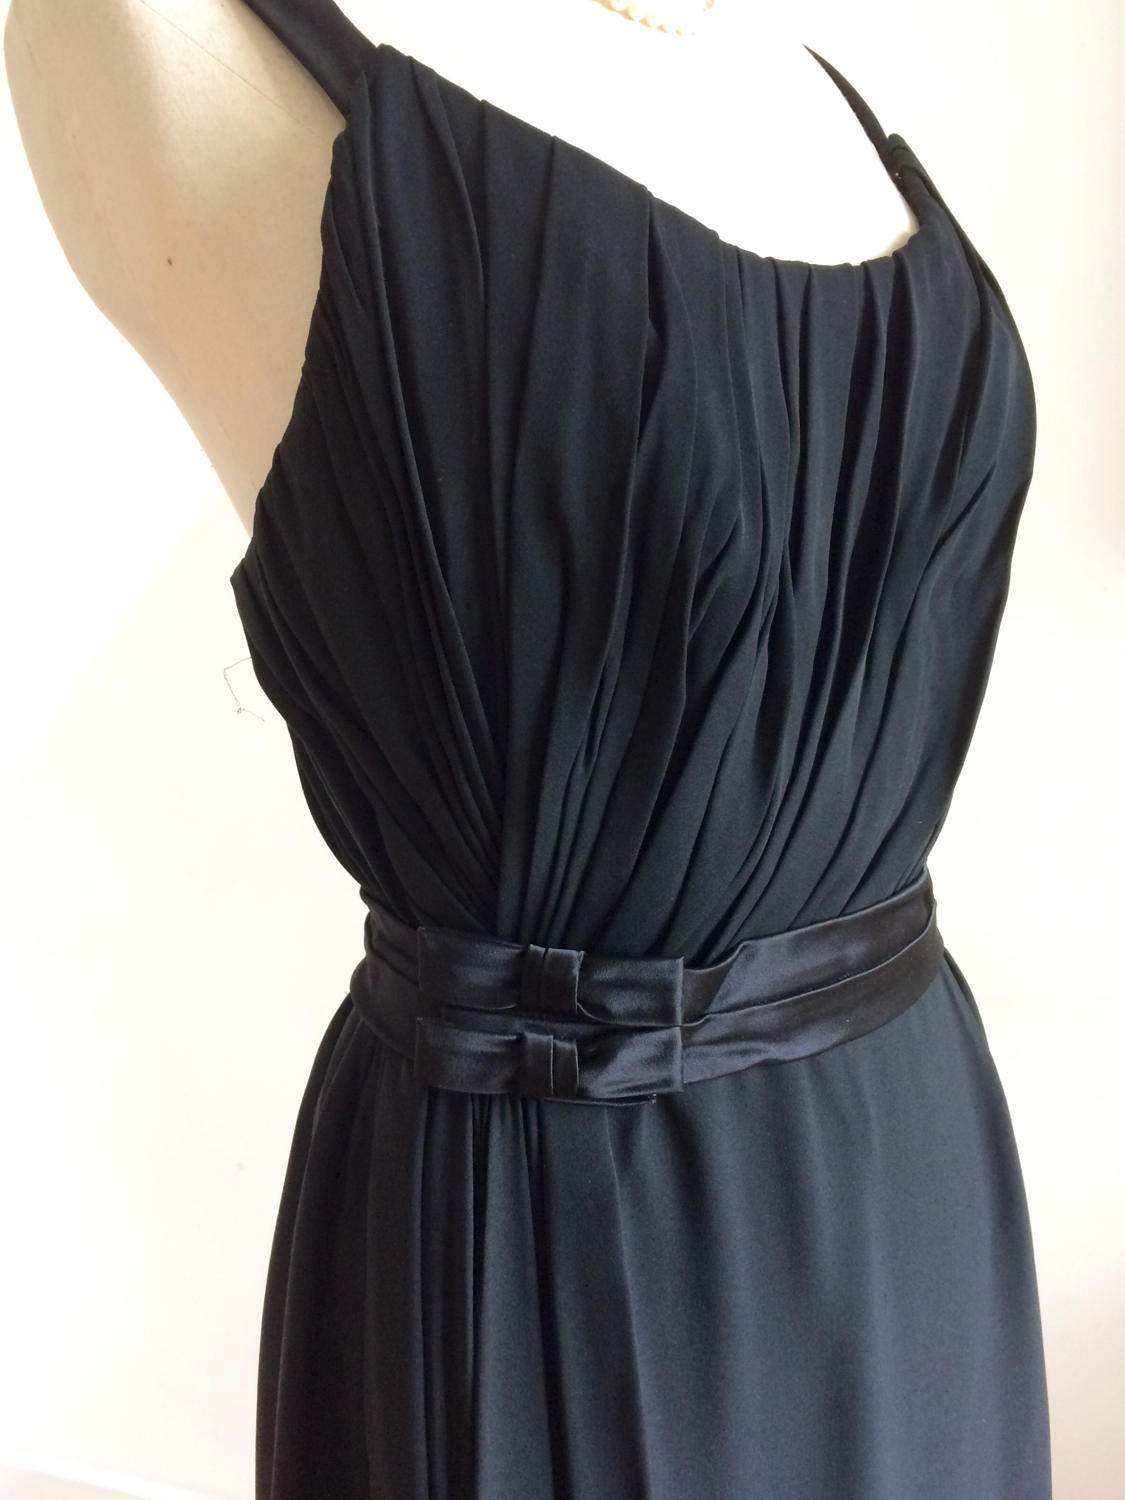 Exquisite Vintage 1940s Cocktail Dress French Black Silk Goodwood ...